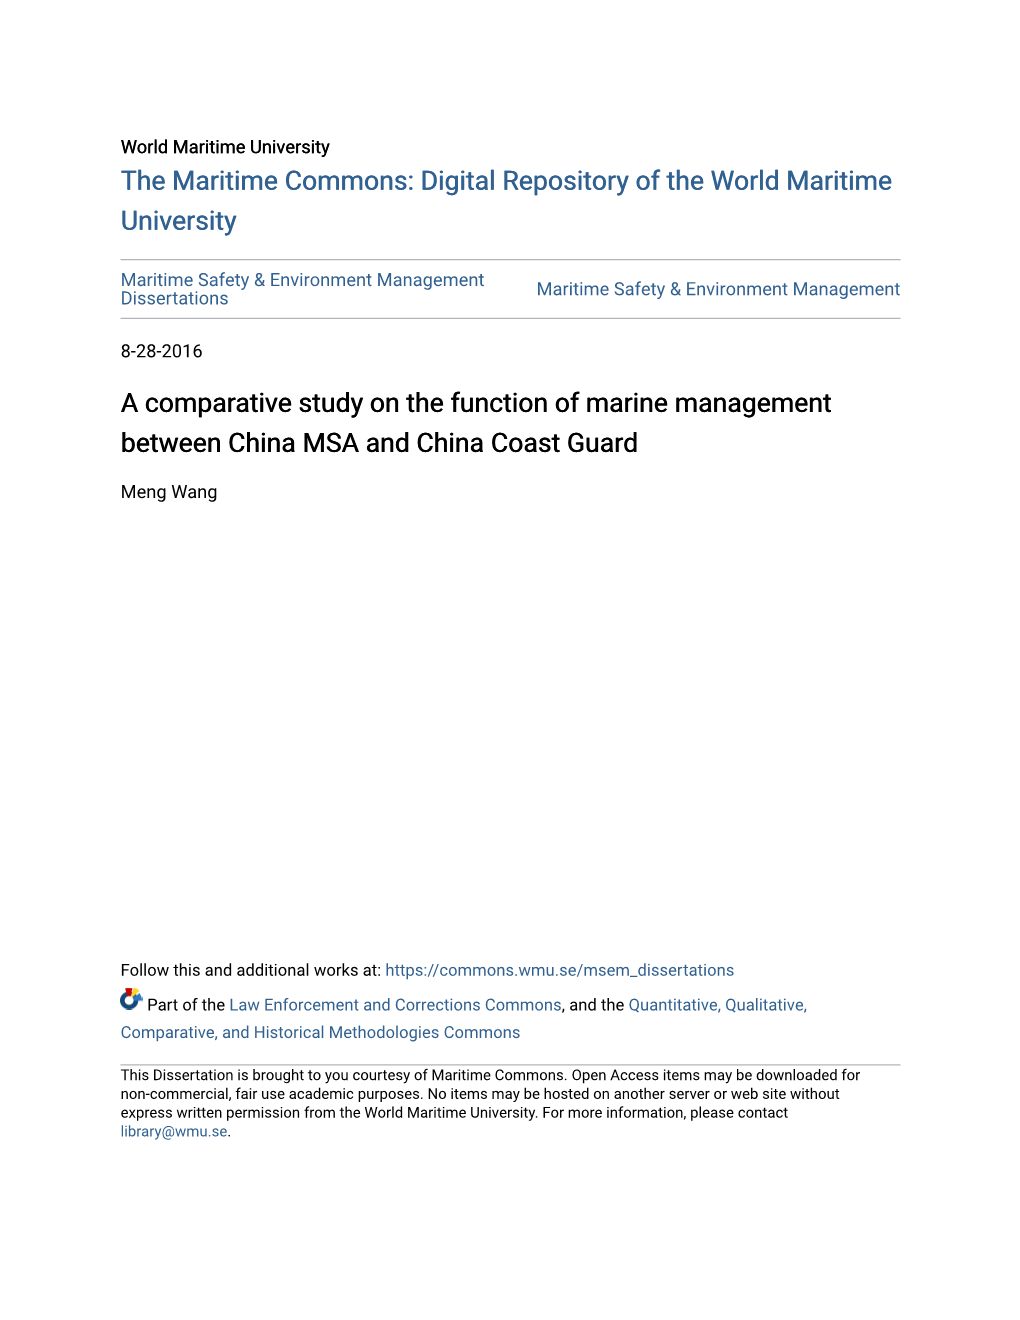 A Comparative Study on the Function of Marine Management Between China MSA and China Coast Guard